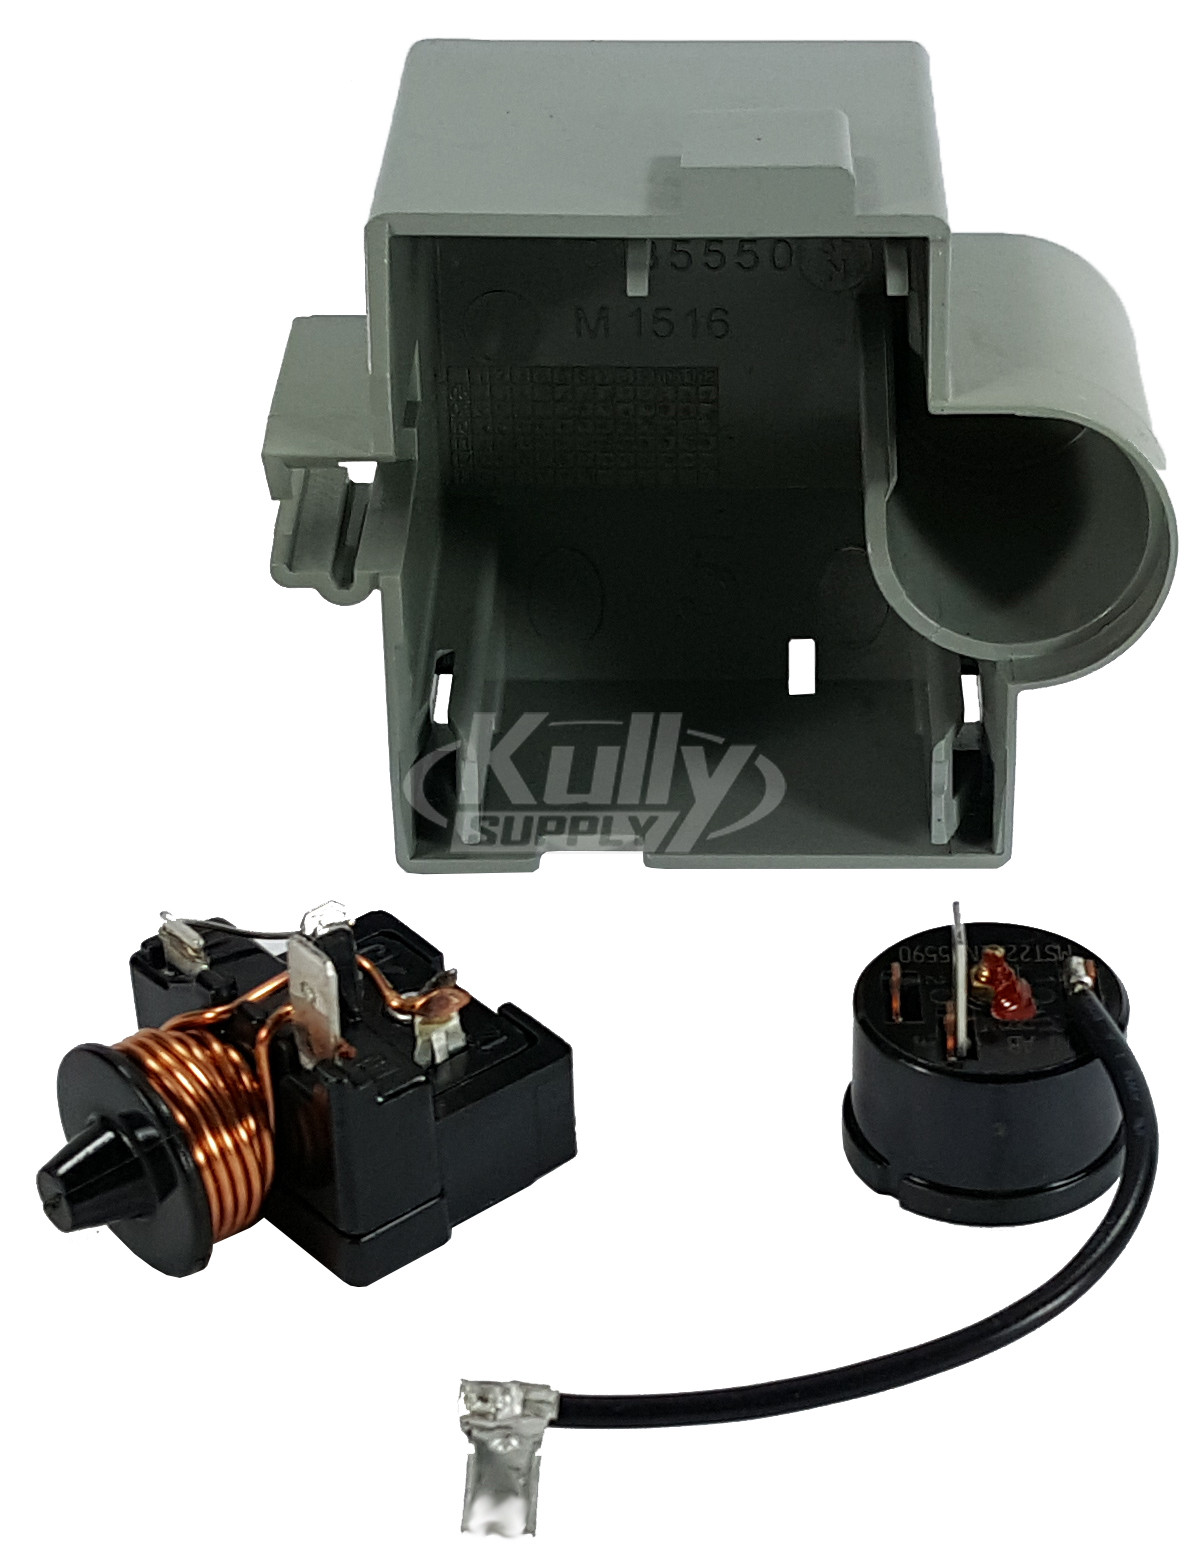 Elkay Overload, Relay, & Cover Kit